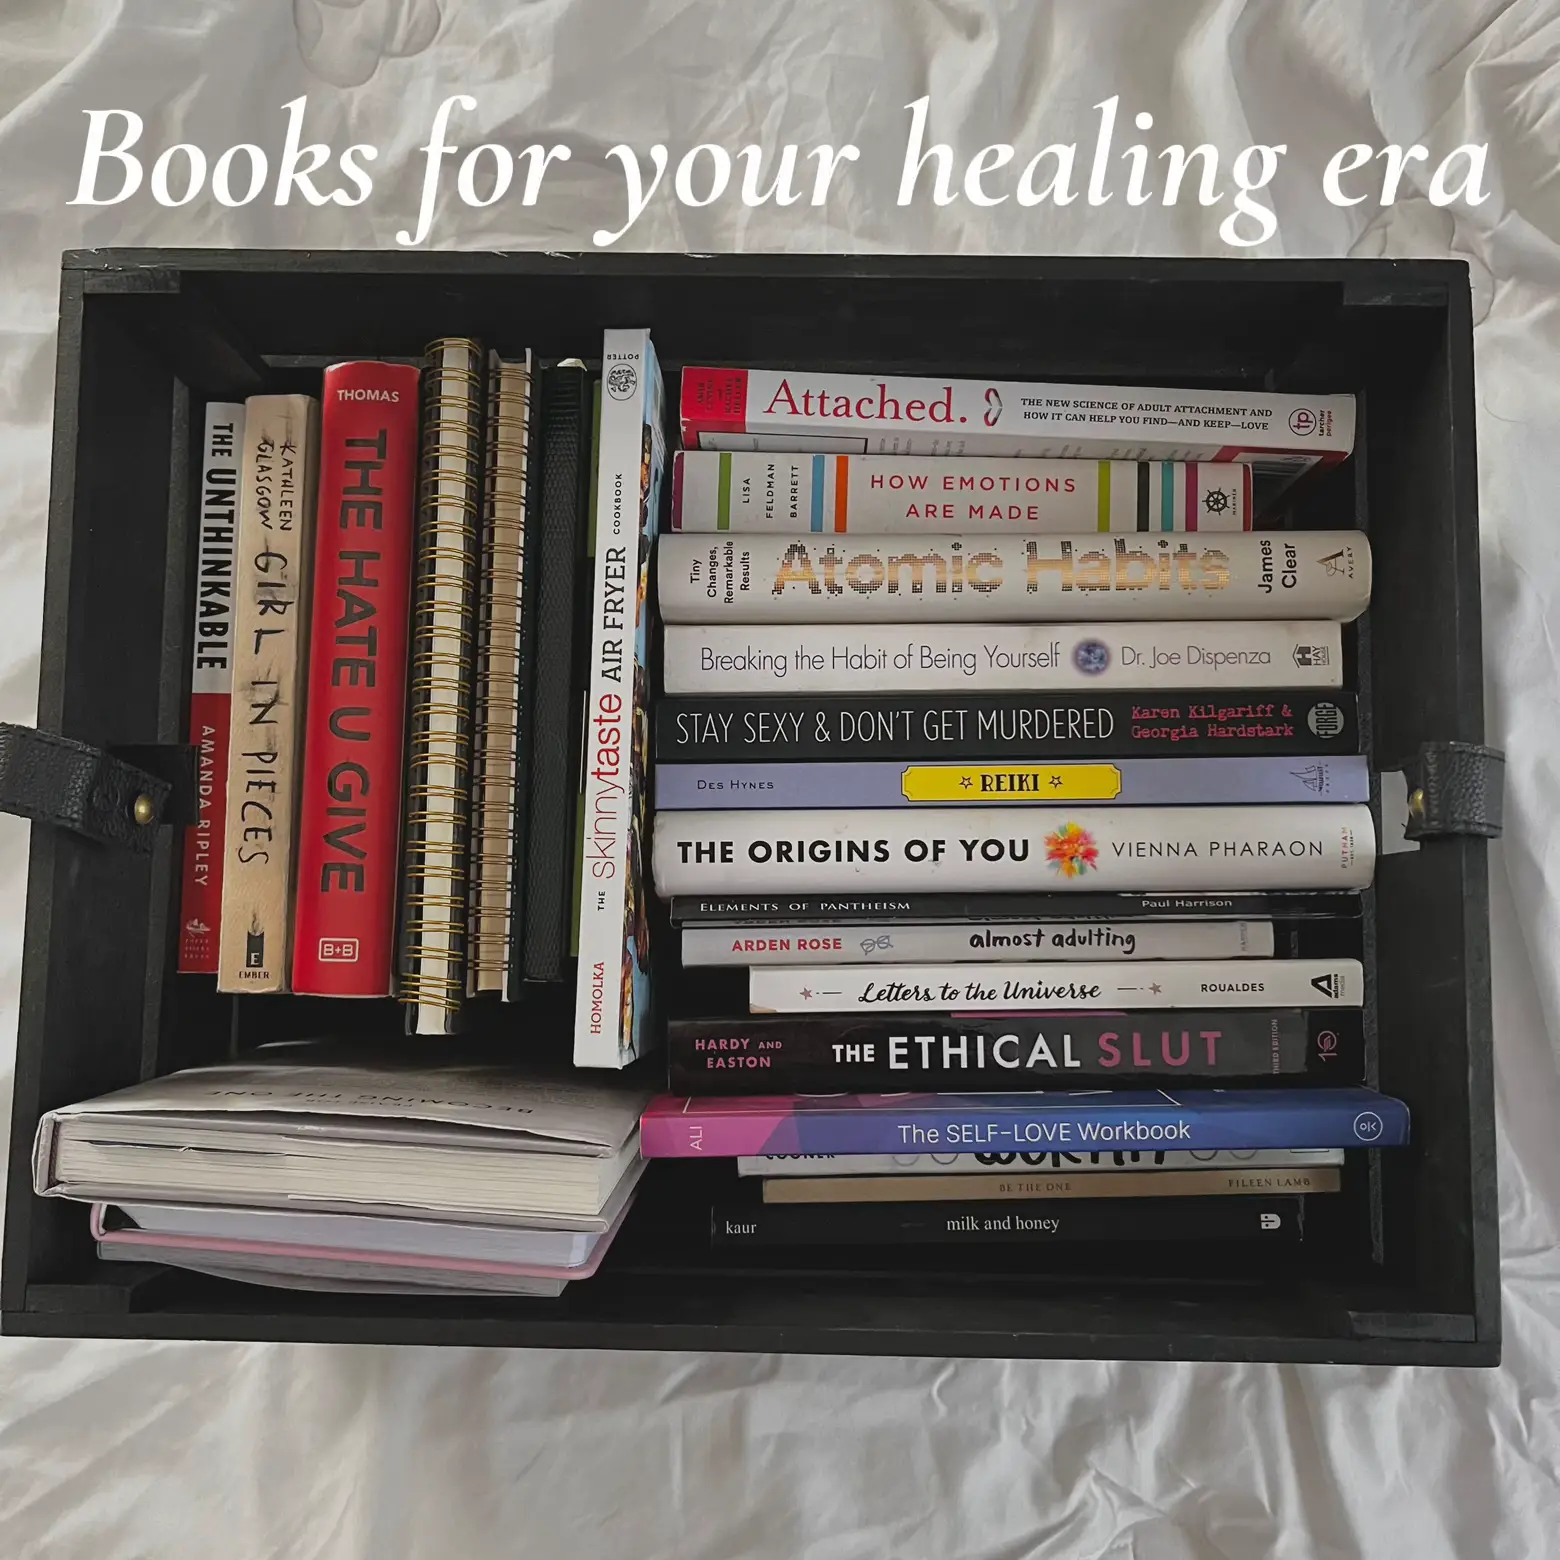 Books for your healing era's images